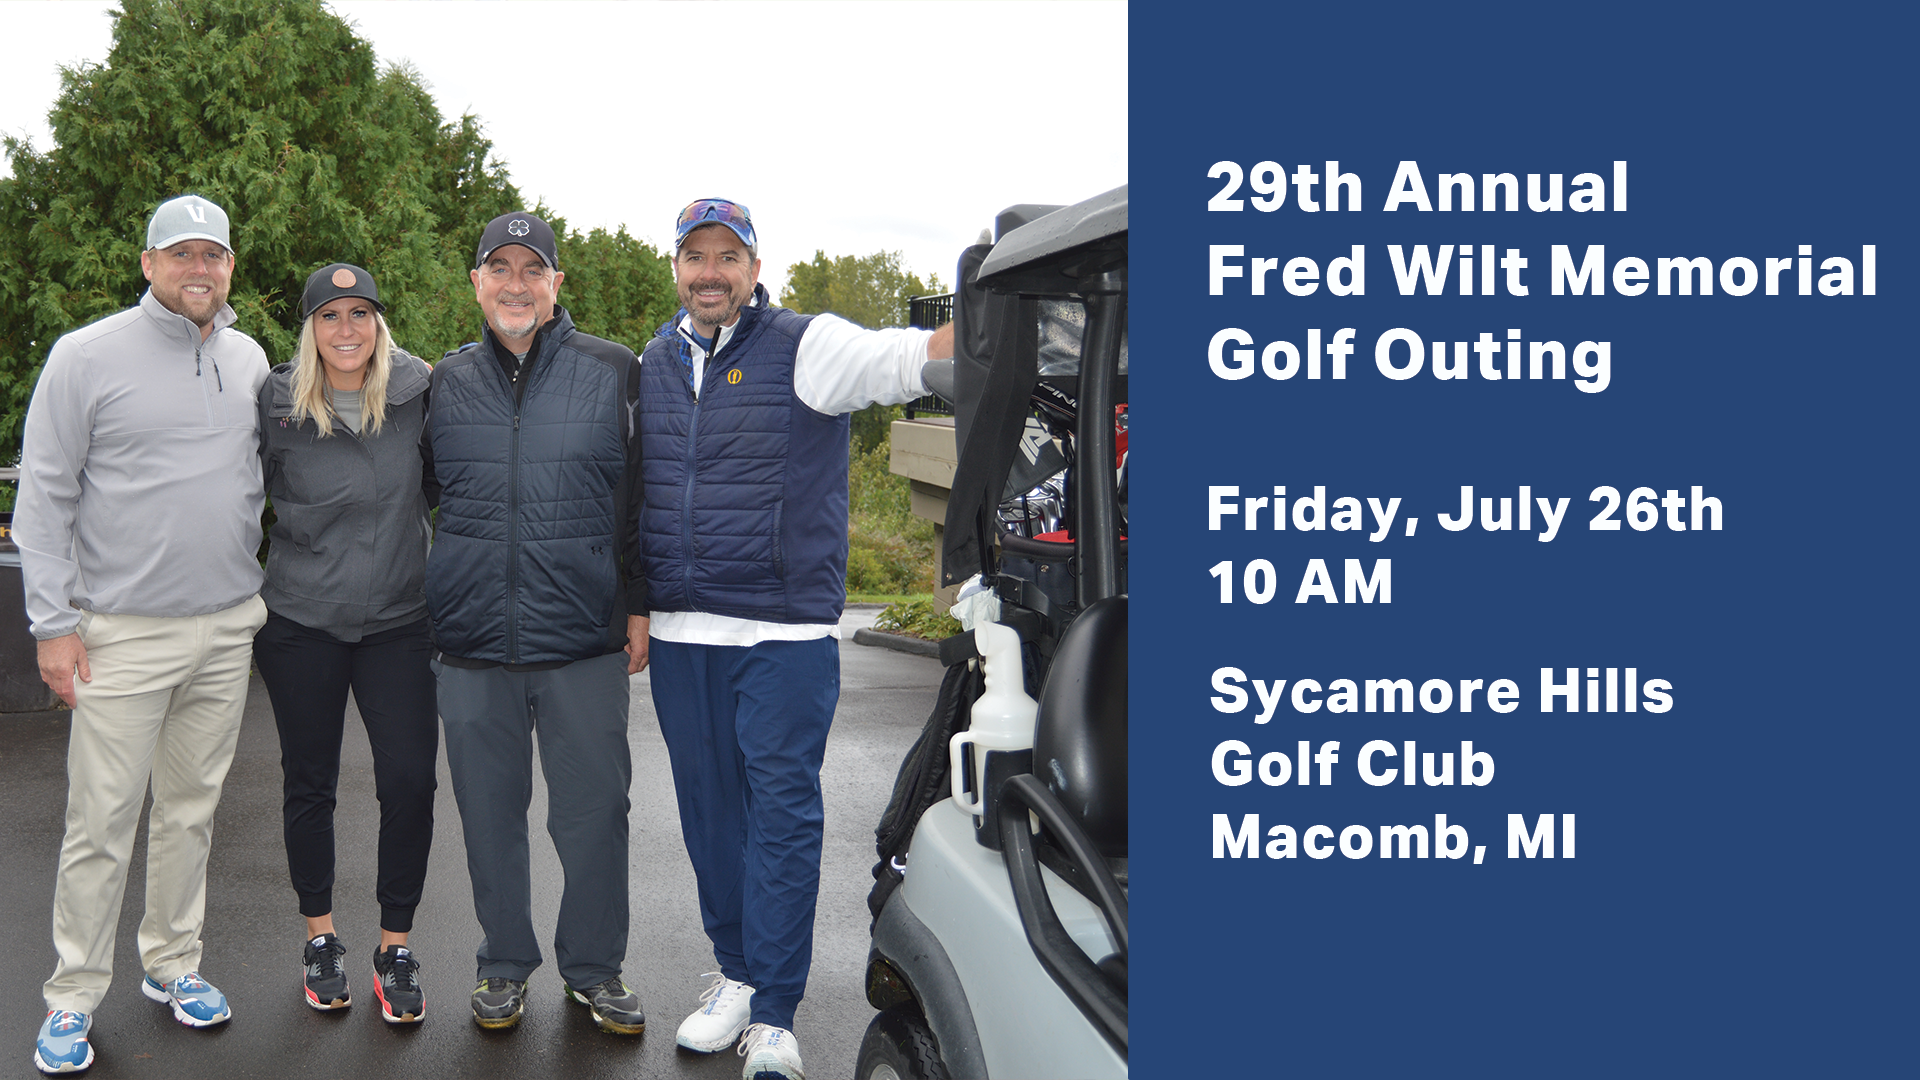 29th Annual Fred Wilt Memorial Golf Outing on Friday, July 26th at 10am at Sycamore Hills Golf Club in Macomb, Michigan